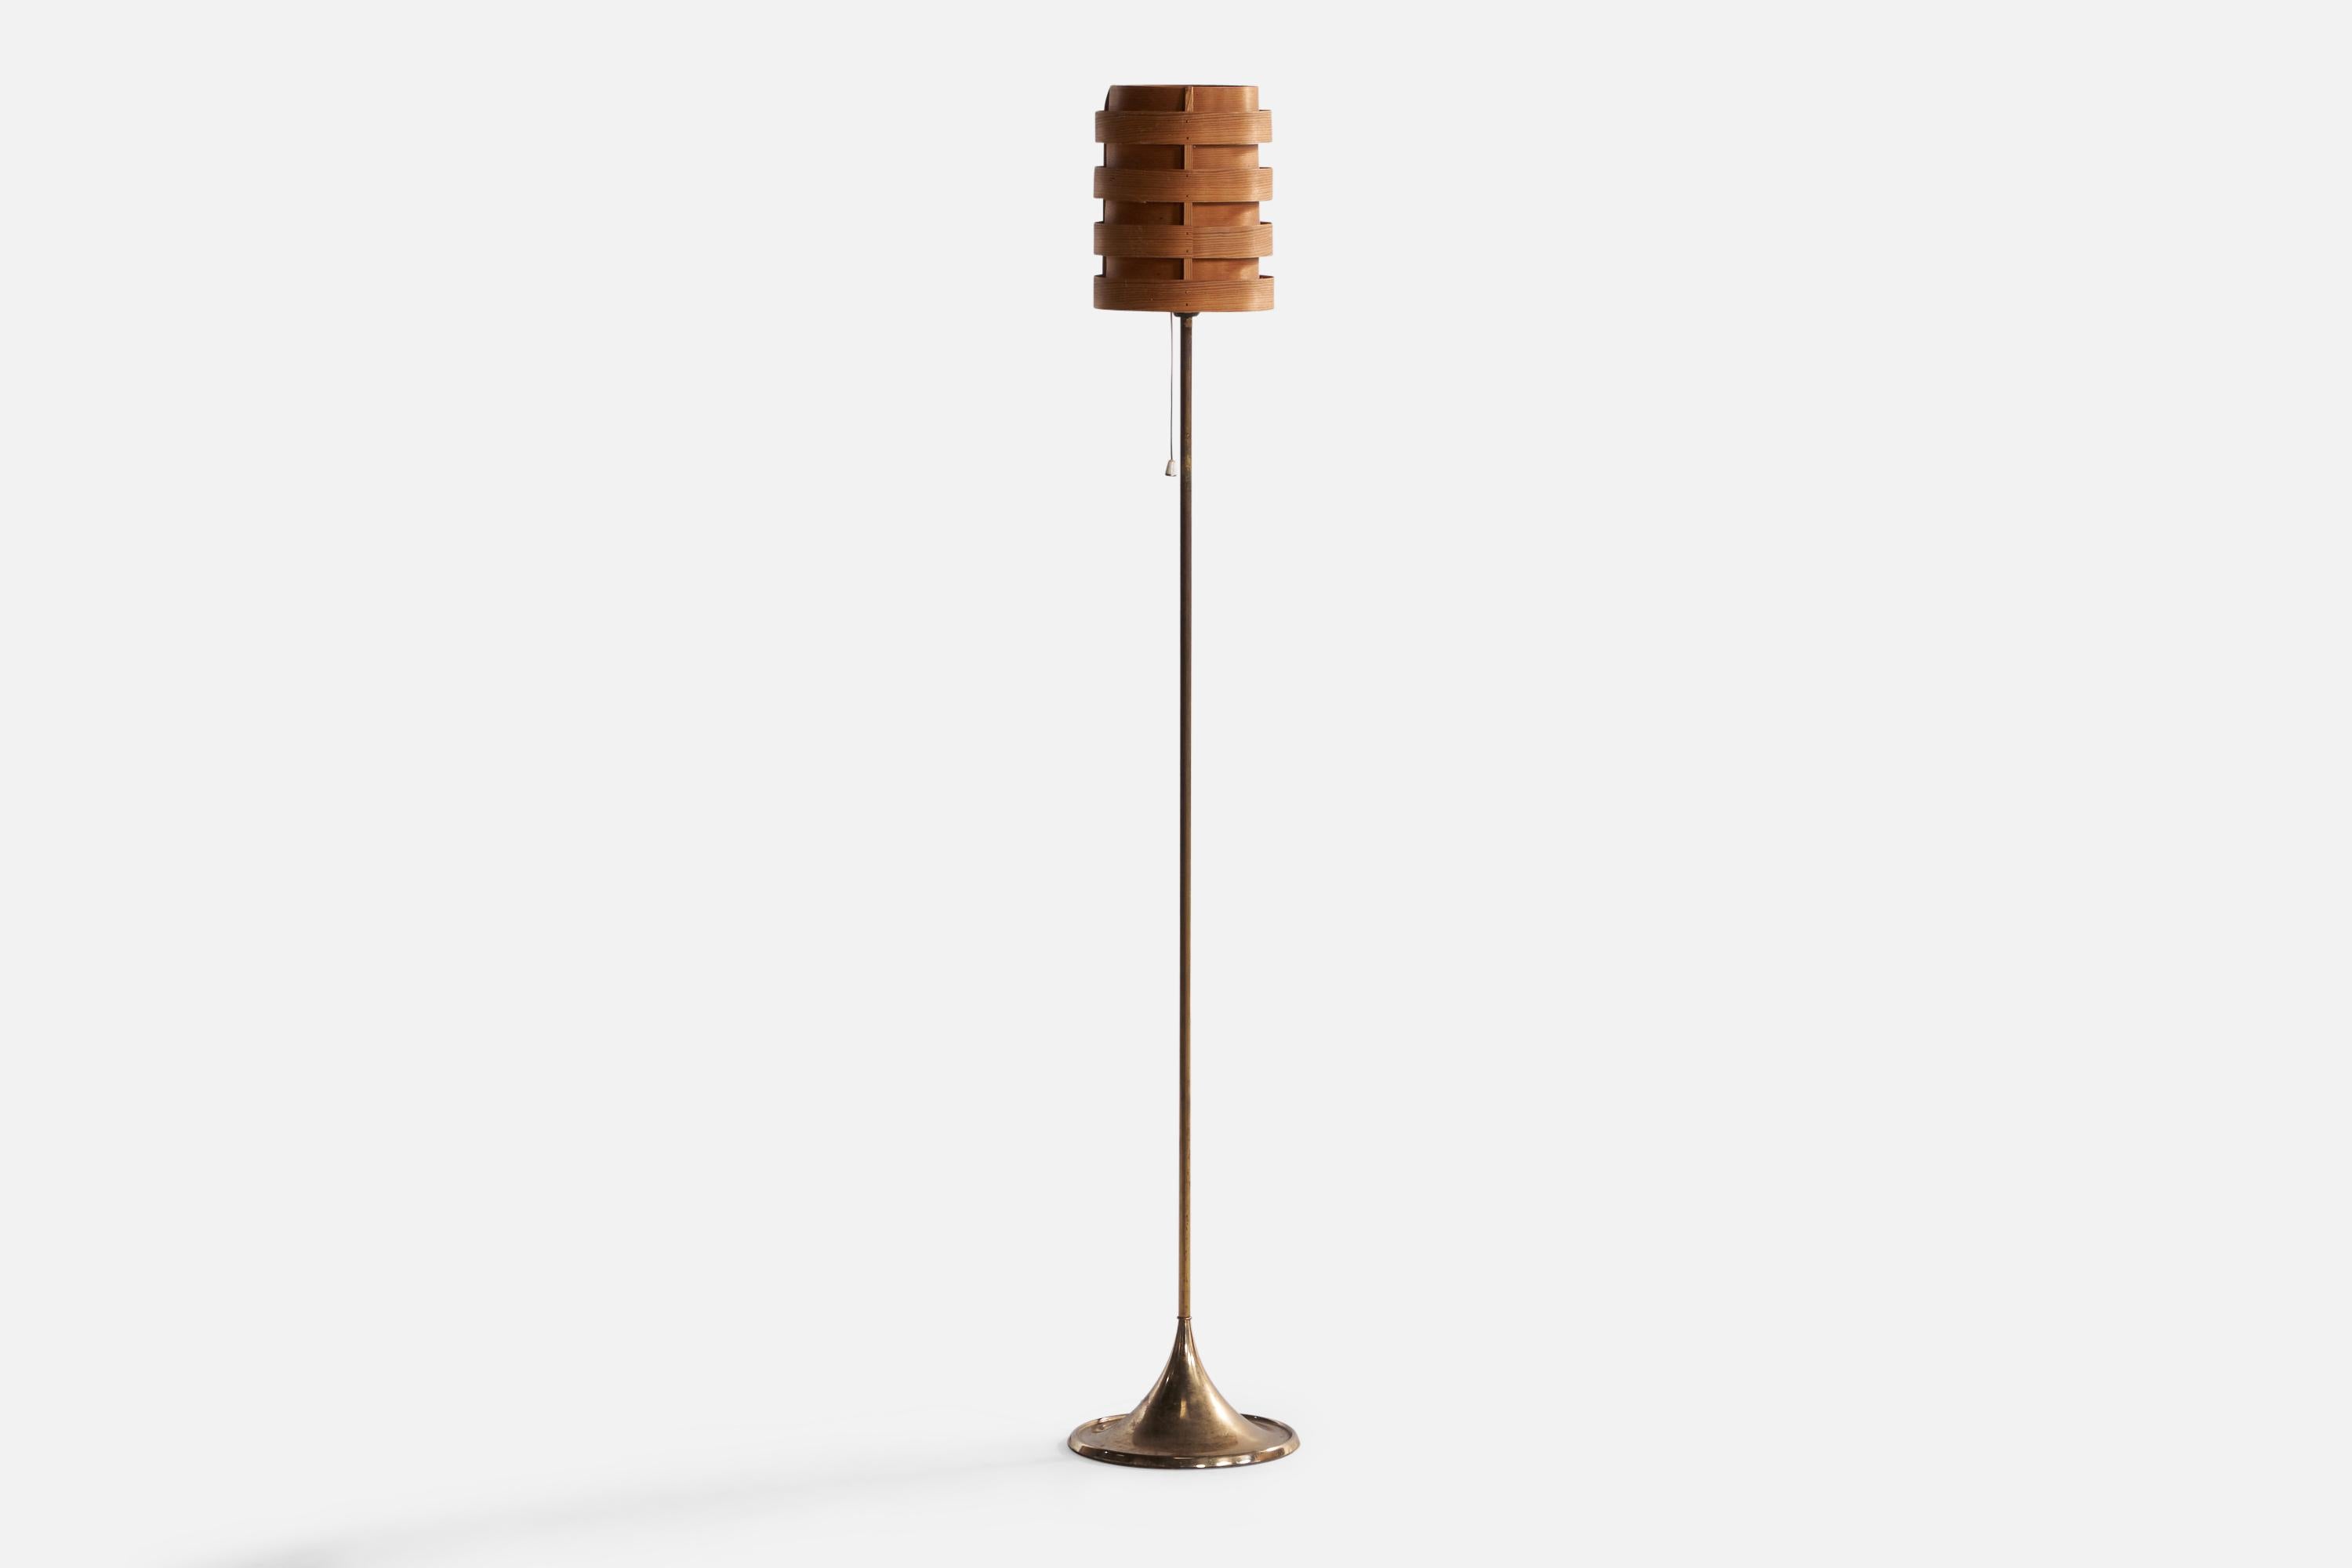 A brass and moulded pine-veneer floor lamp designed and produced in Sweden, 1960s.

Assorted vintage lampshade designed by Hans-Agne Jakobsson.

Overall Dimensions (inches): 44.5” H x 8.35” Diameter. Stated dimensions include shade.
Bulb